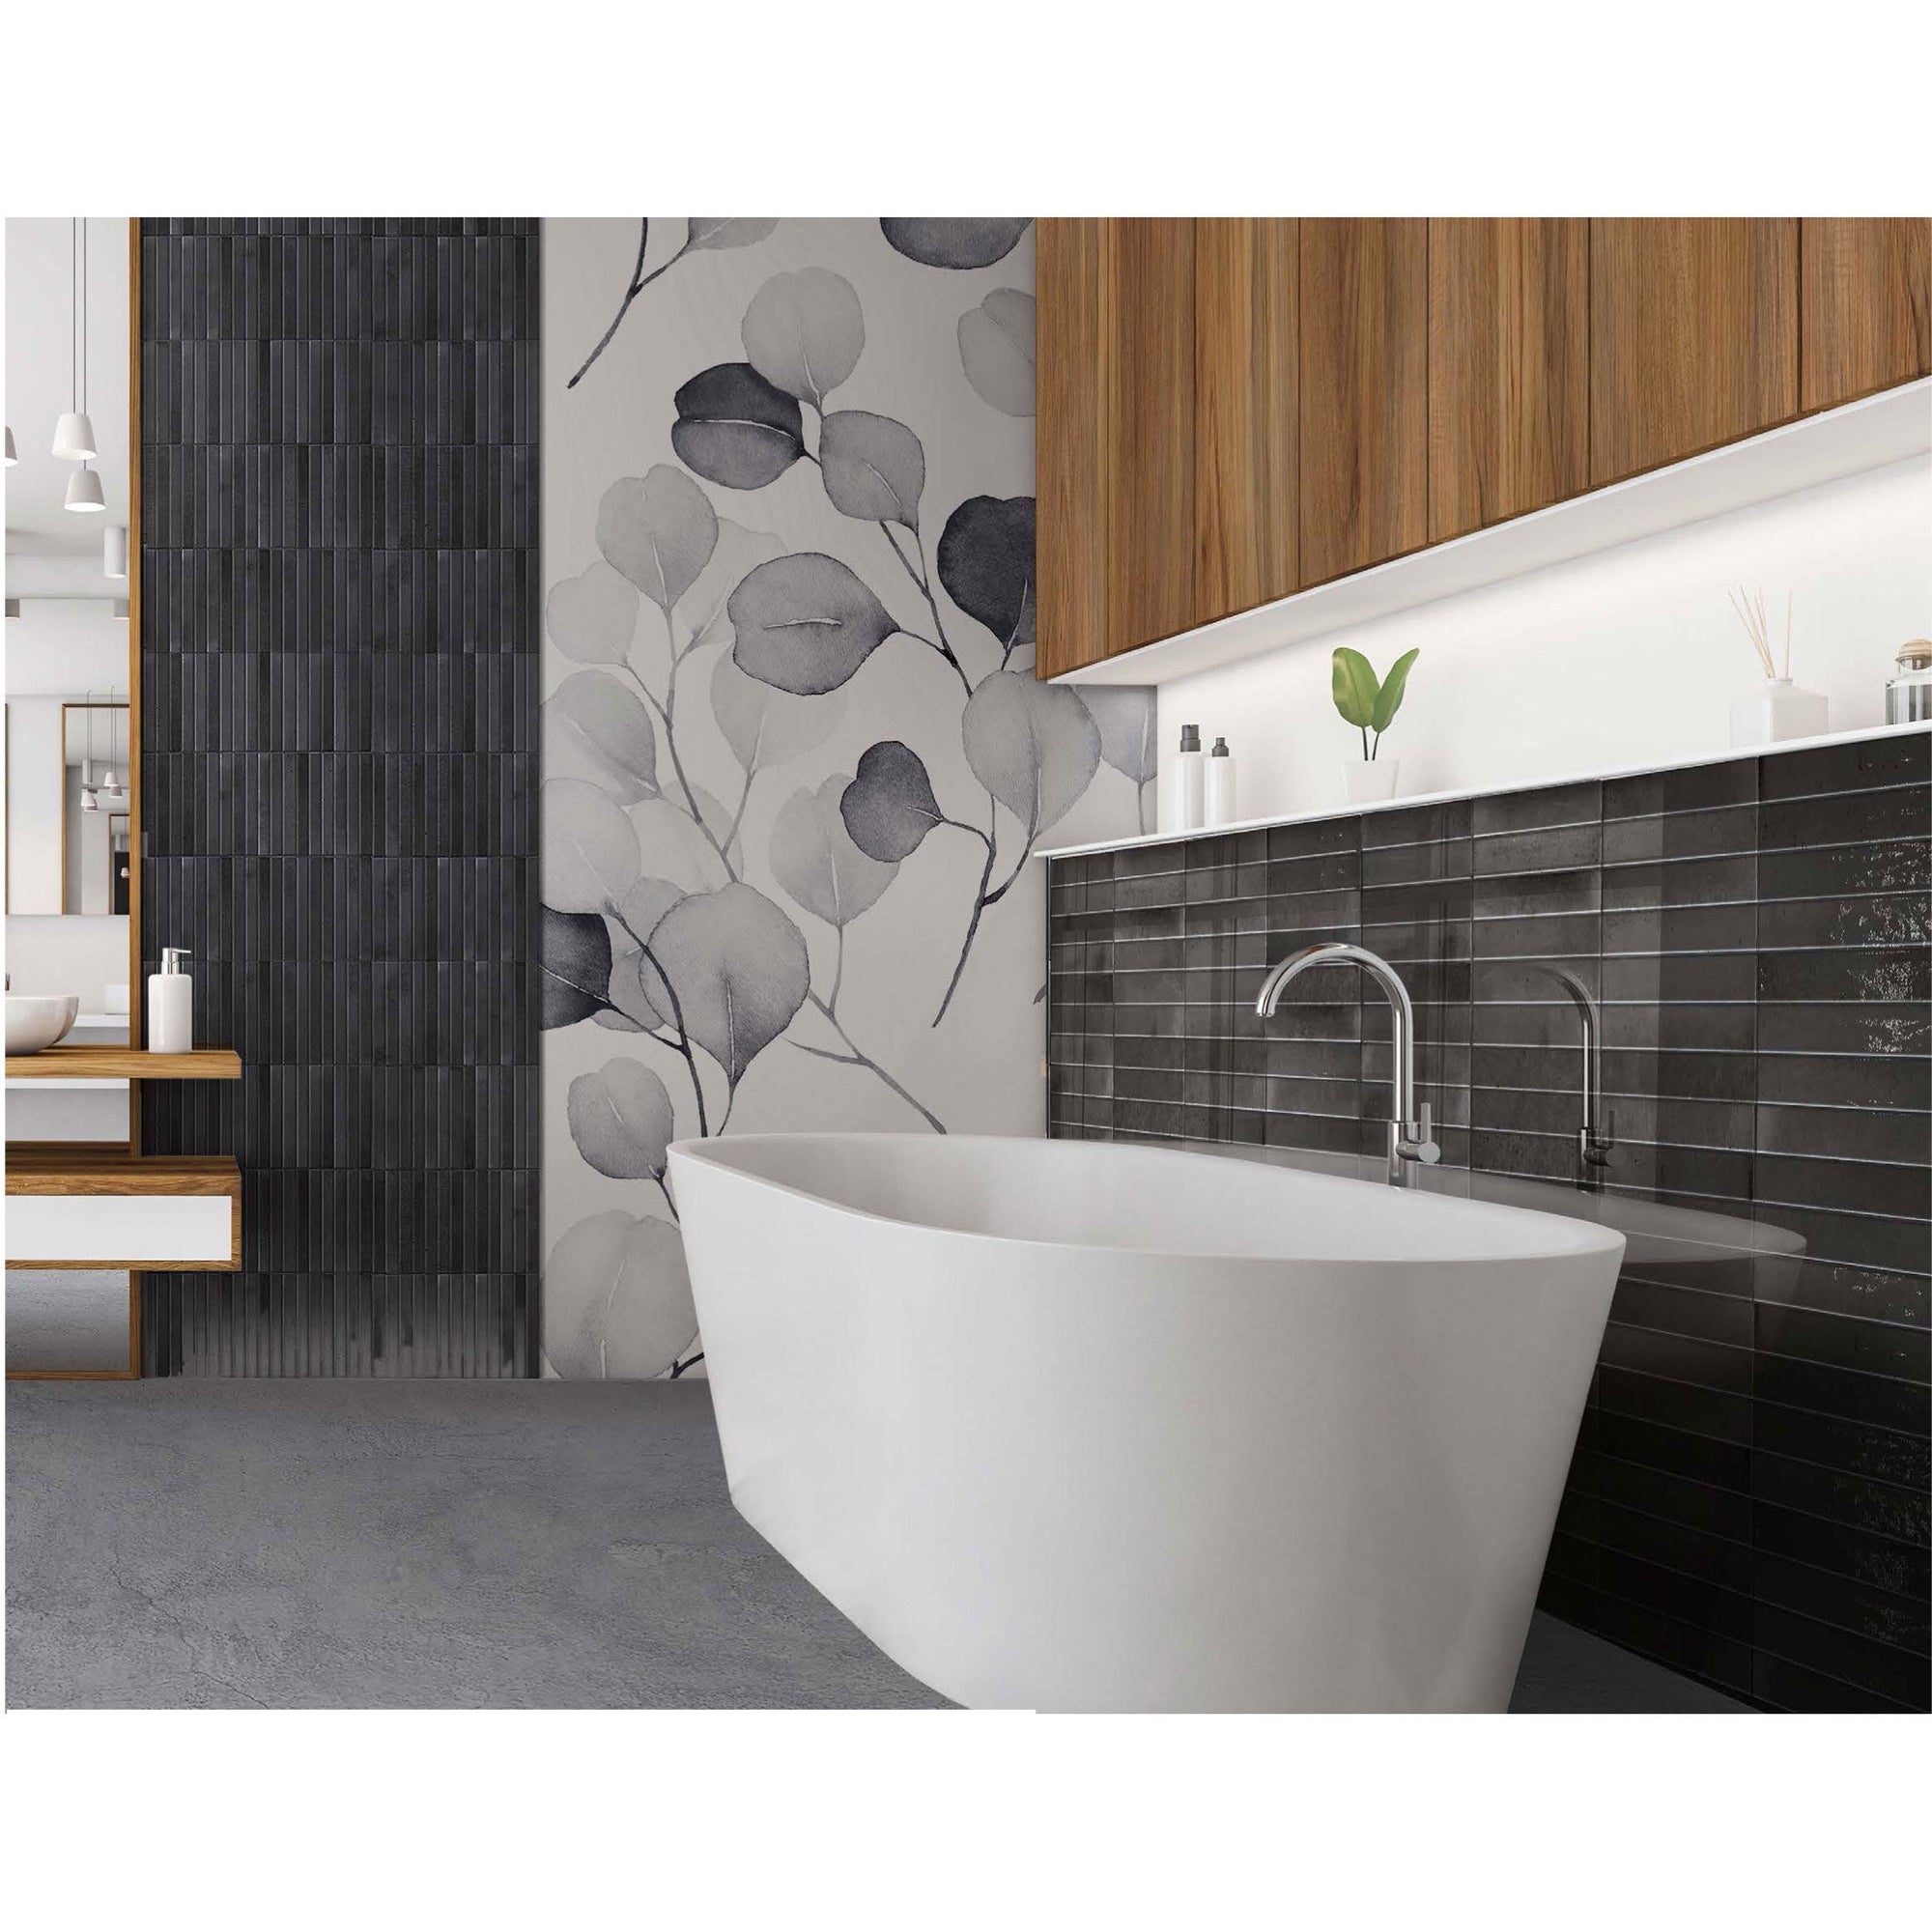 Cobsa - Homey Series 5 in. x 10 in. Porcelain Subway Tile - Licorice